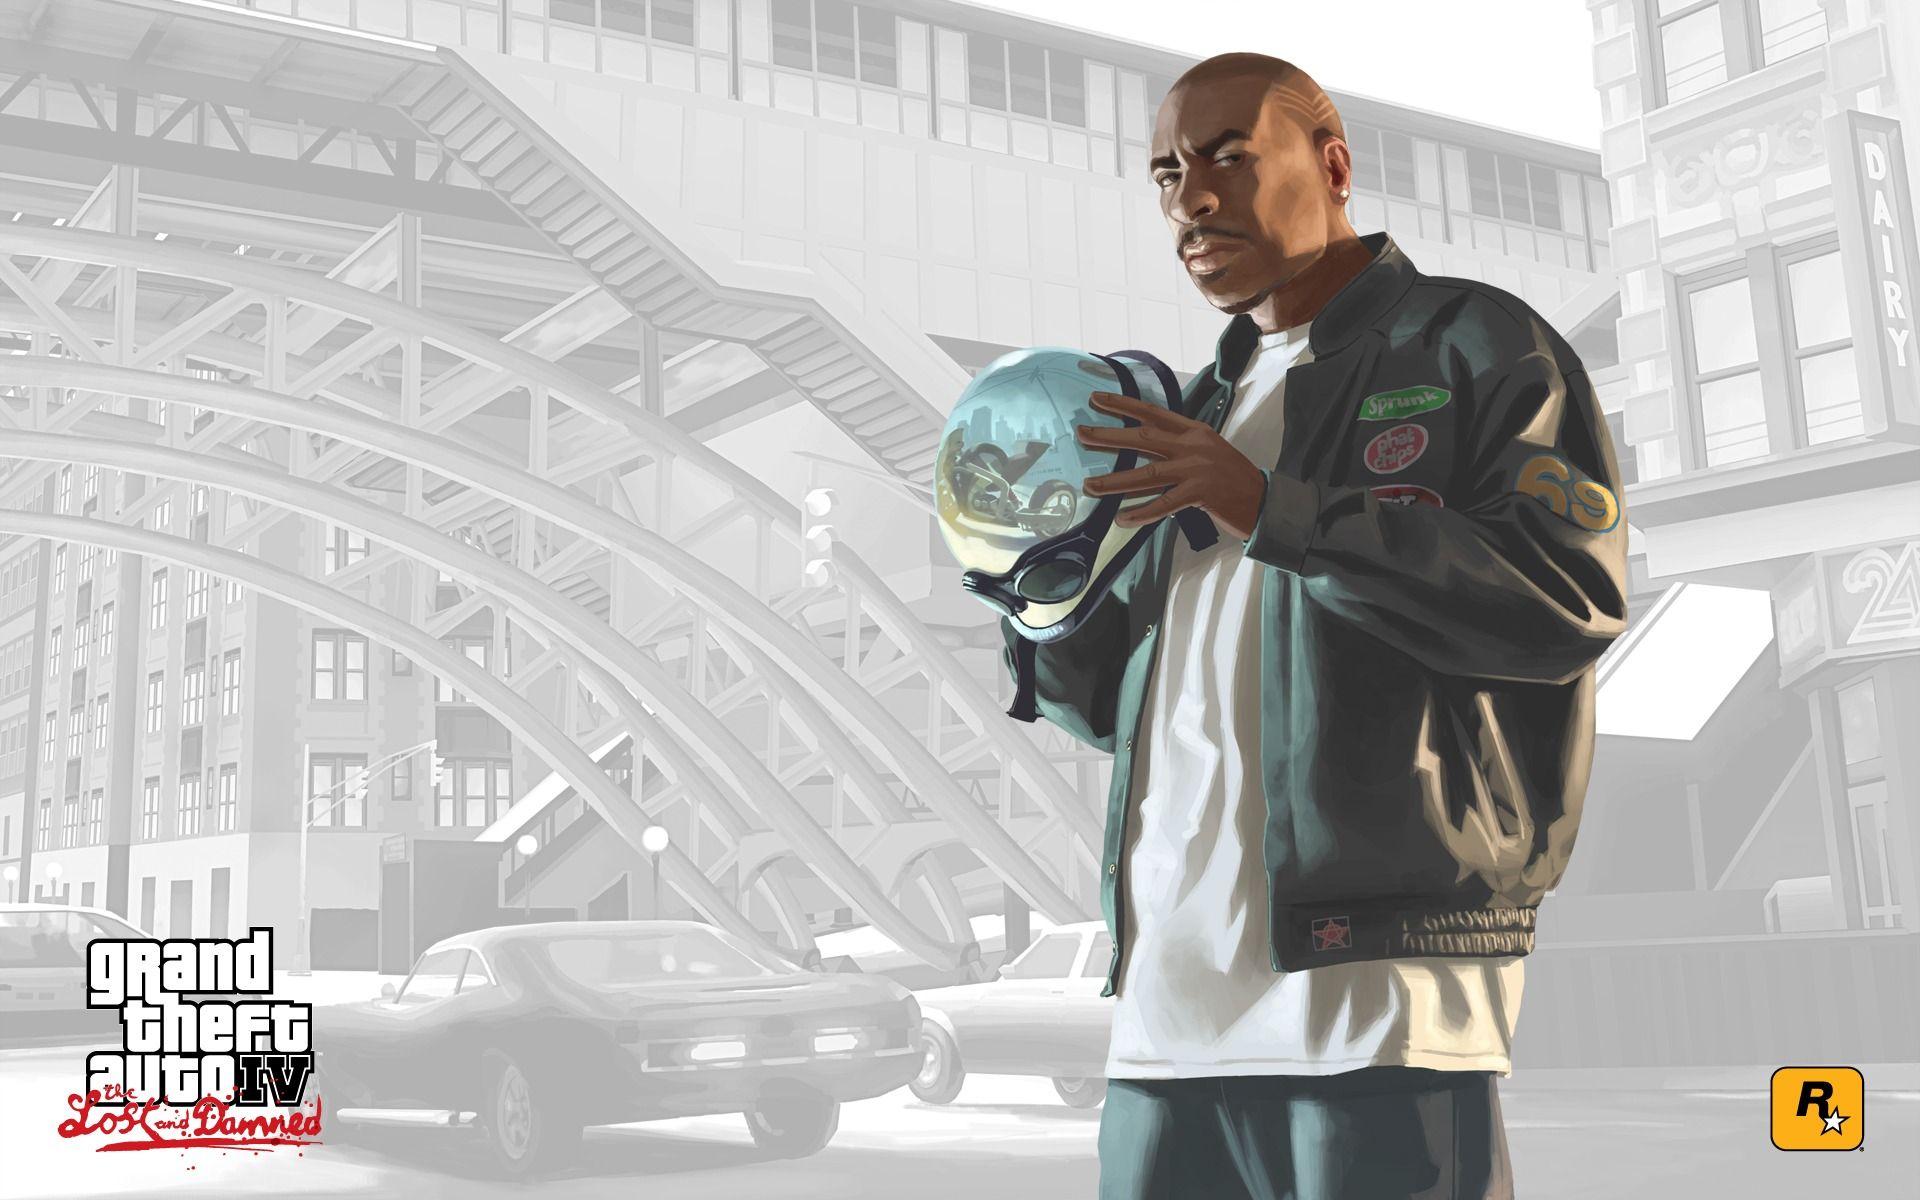 GTA The Lost And Damned Wallpaper GTA IV Games Wallpaper in jpg